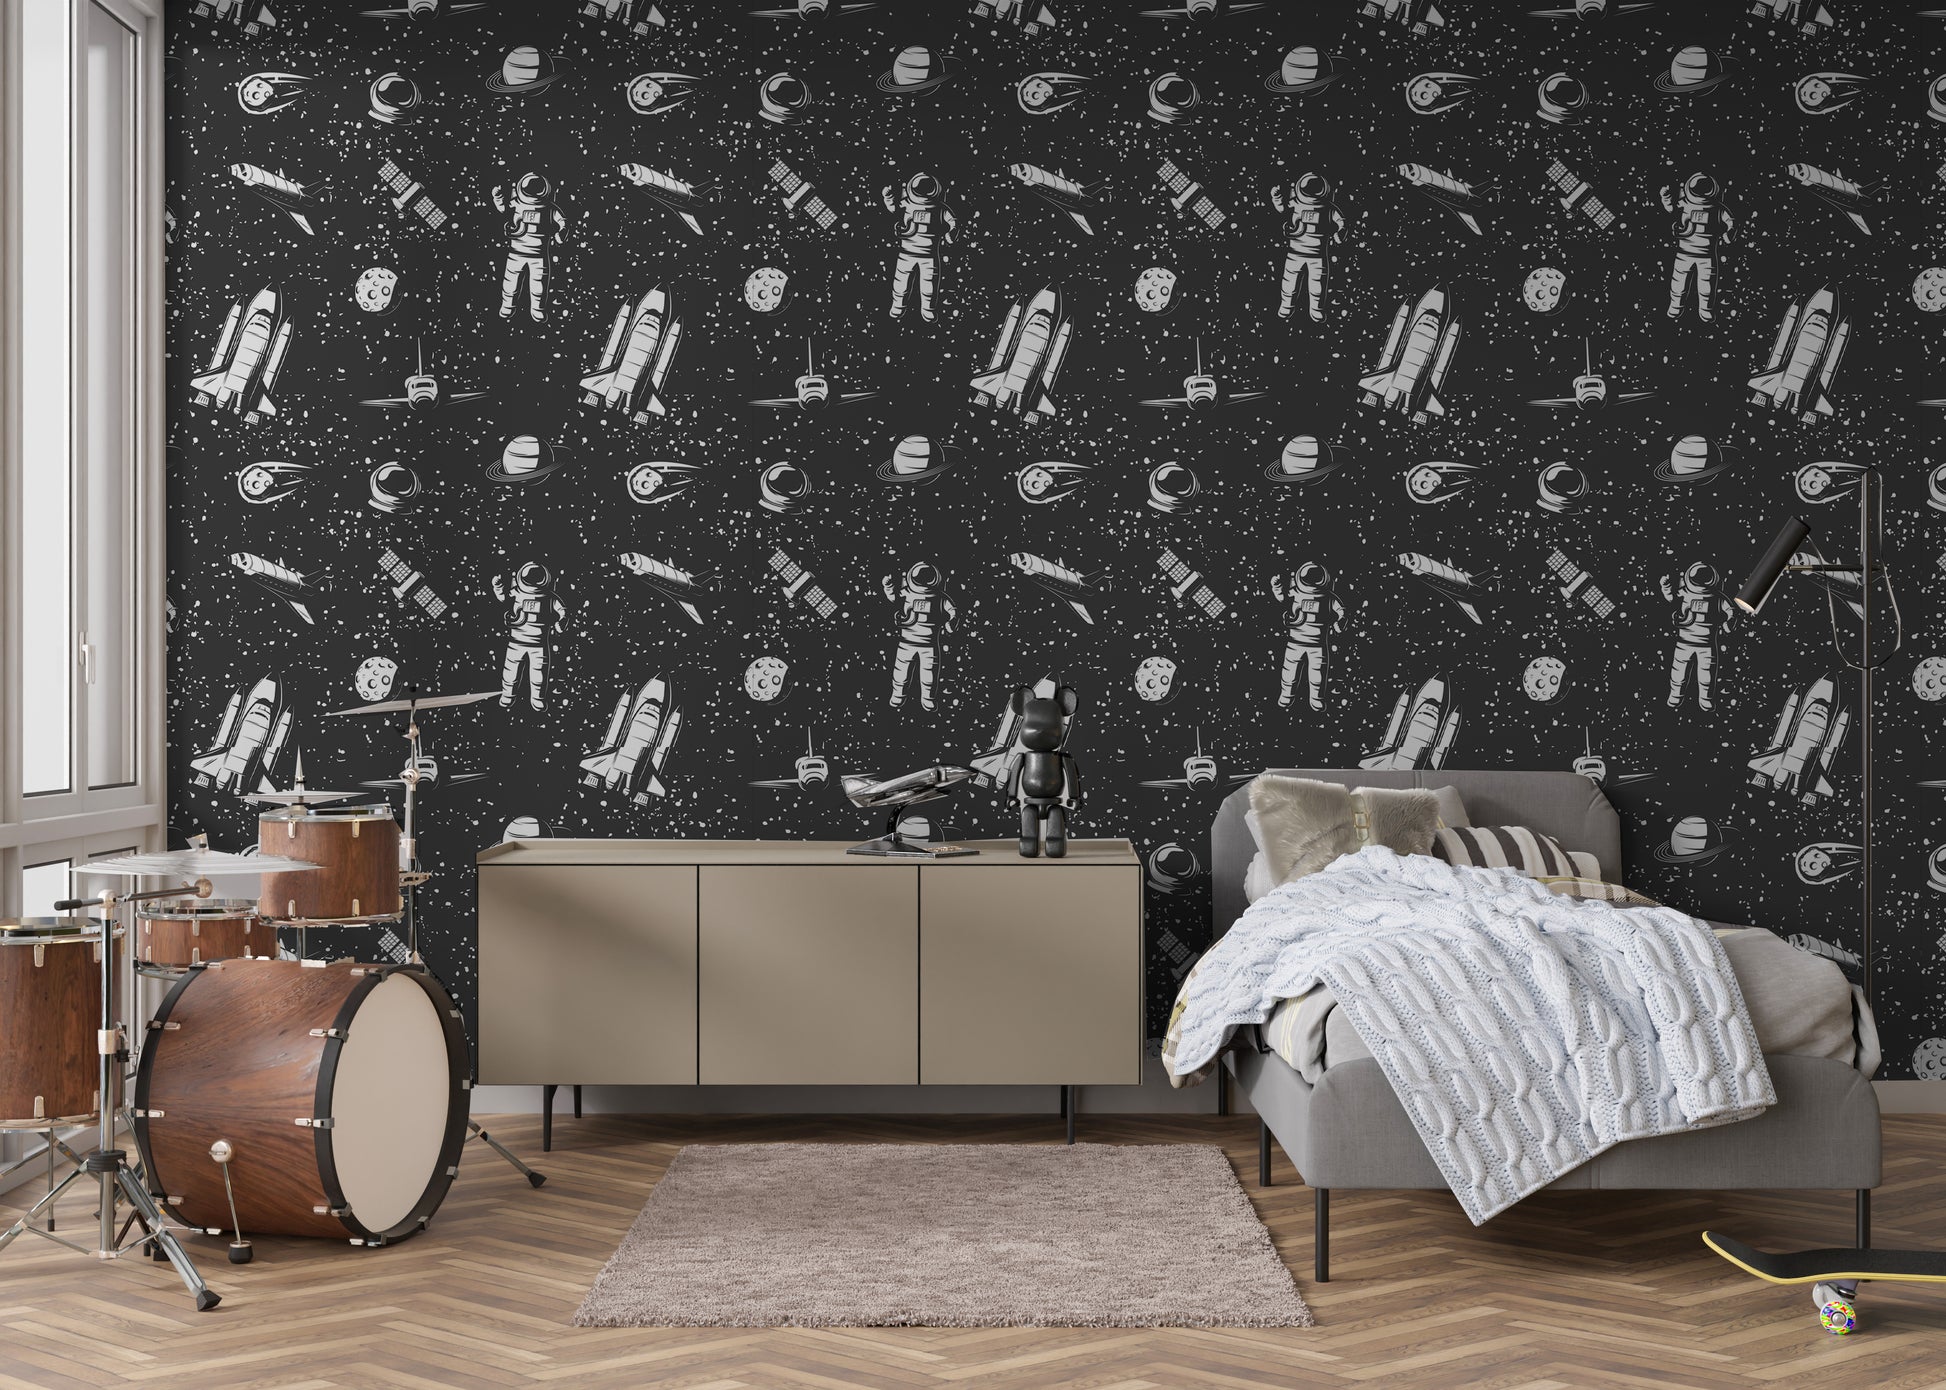 Teen room with space themed removable peel and stick wallpaper